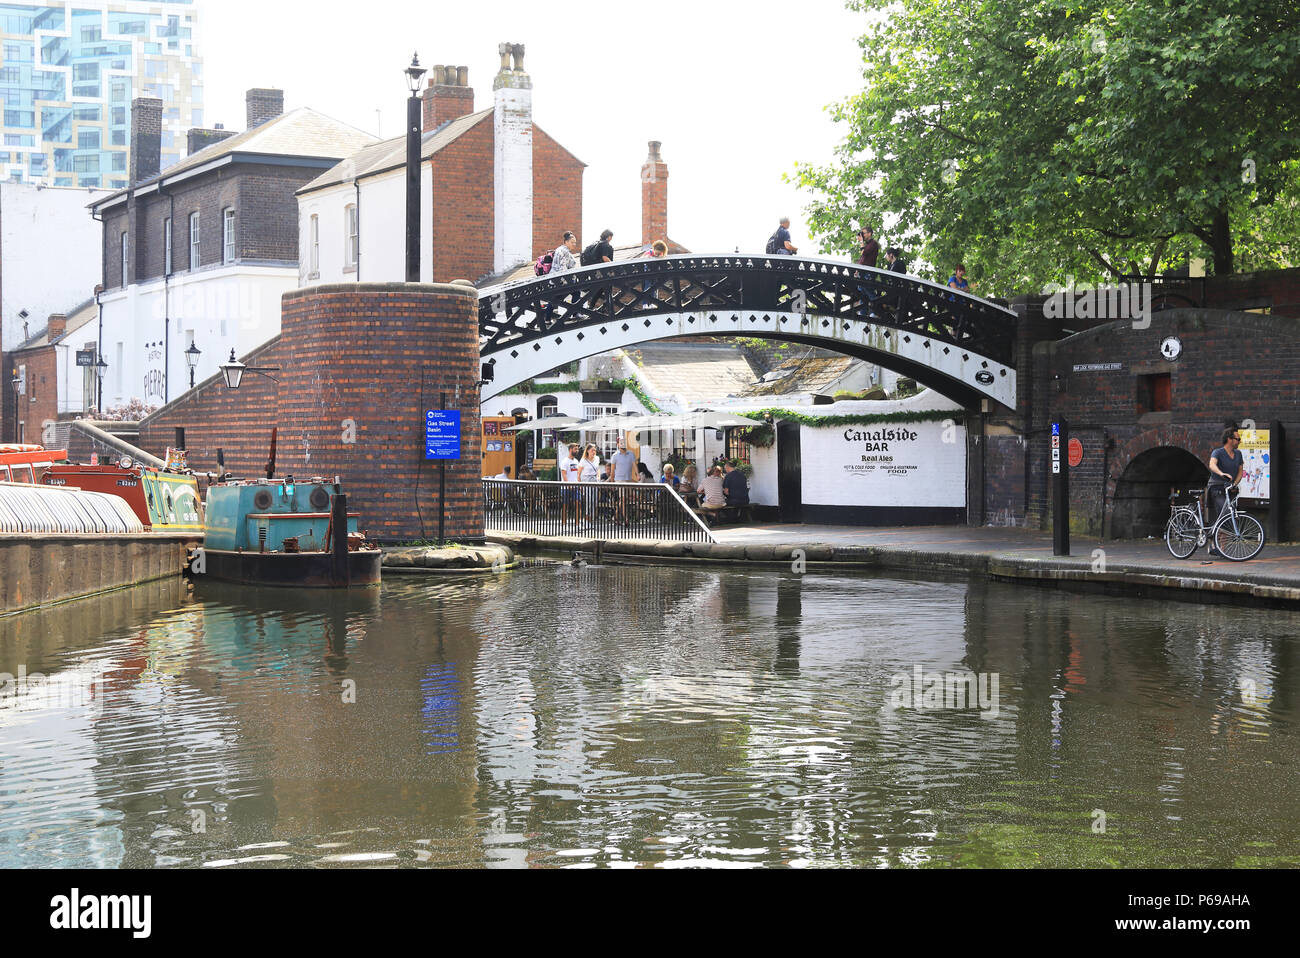 Attractive Gas Street Basin in Birmingham in the Midlands in the UK. The heart of the canal network, the towpaths are lined with bars and pubs, UK Stock Photo